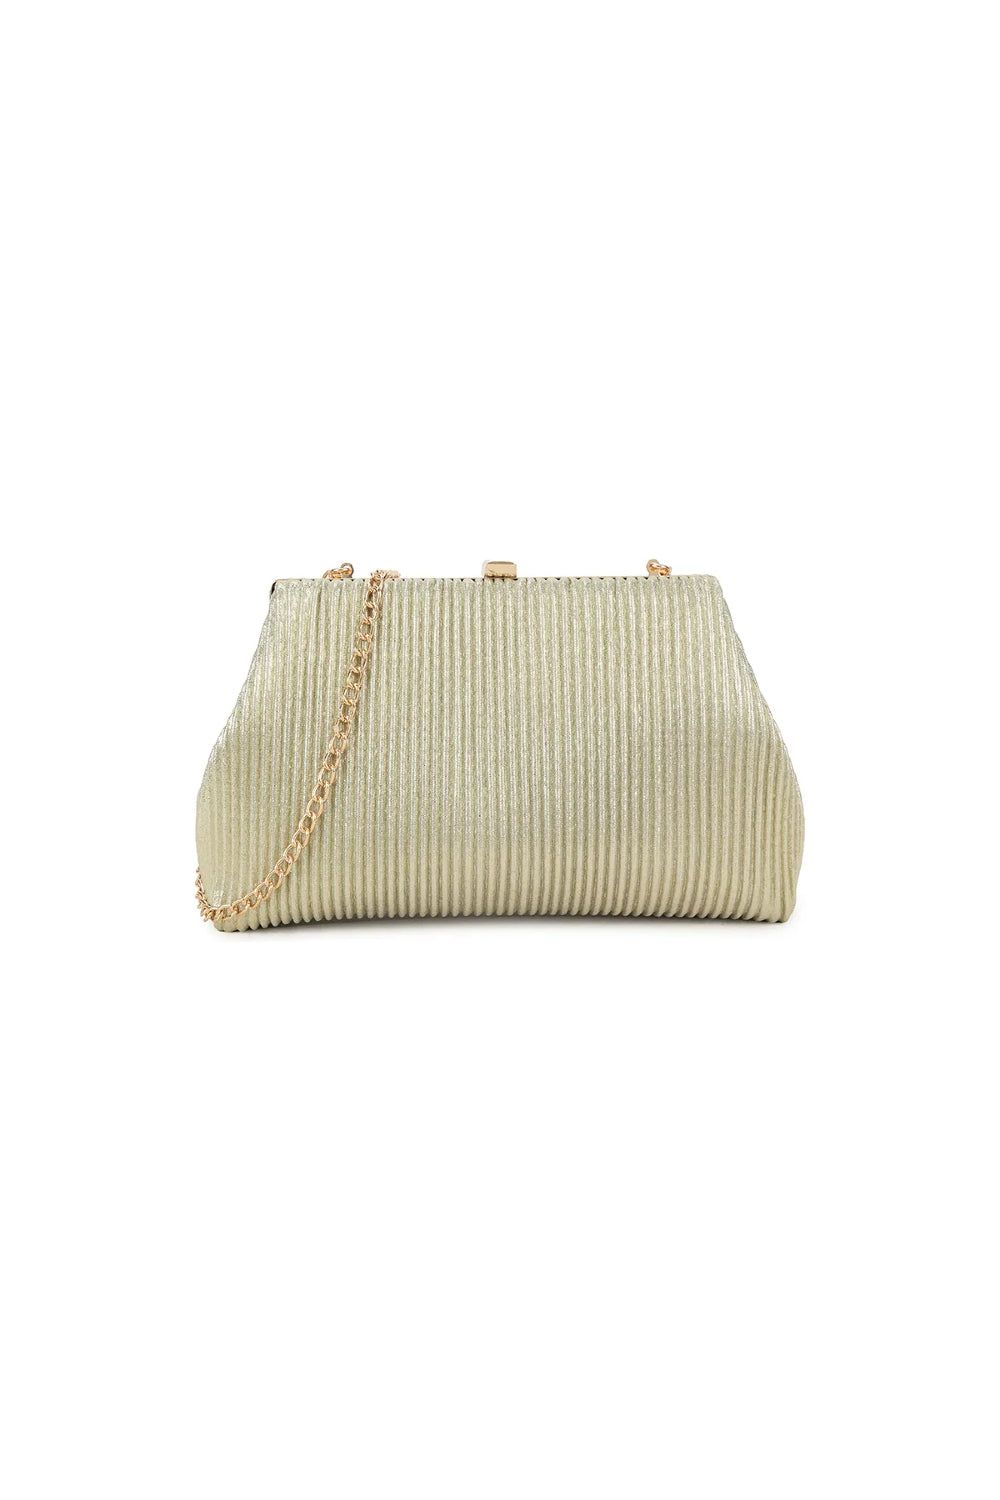 Gold Glitter Clutch Bag With Removable Chain ALZ3044